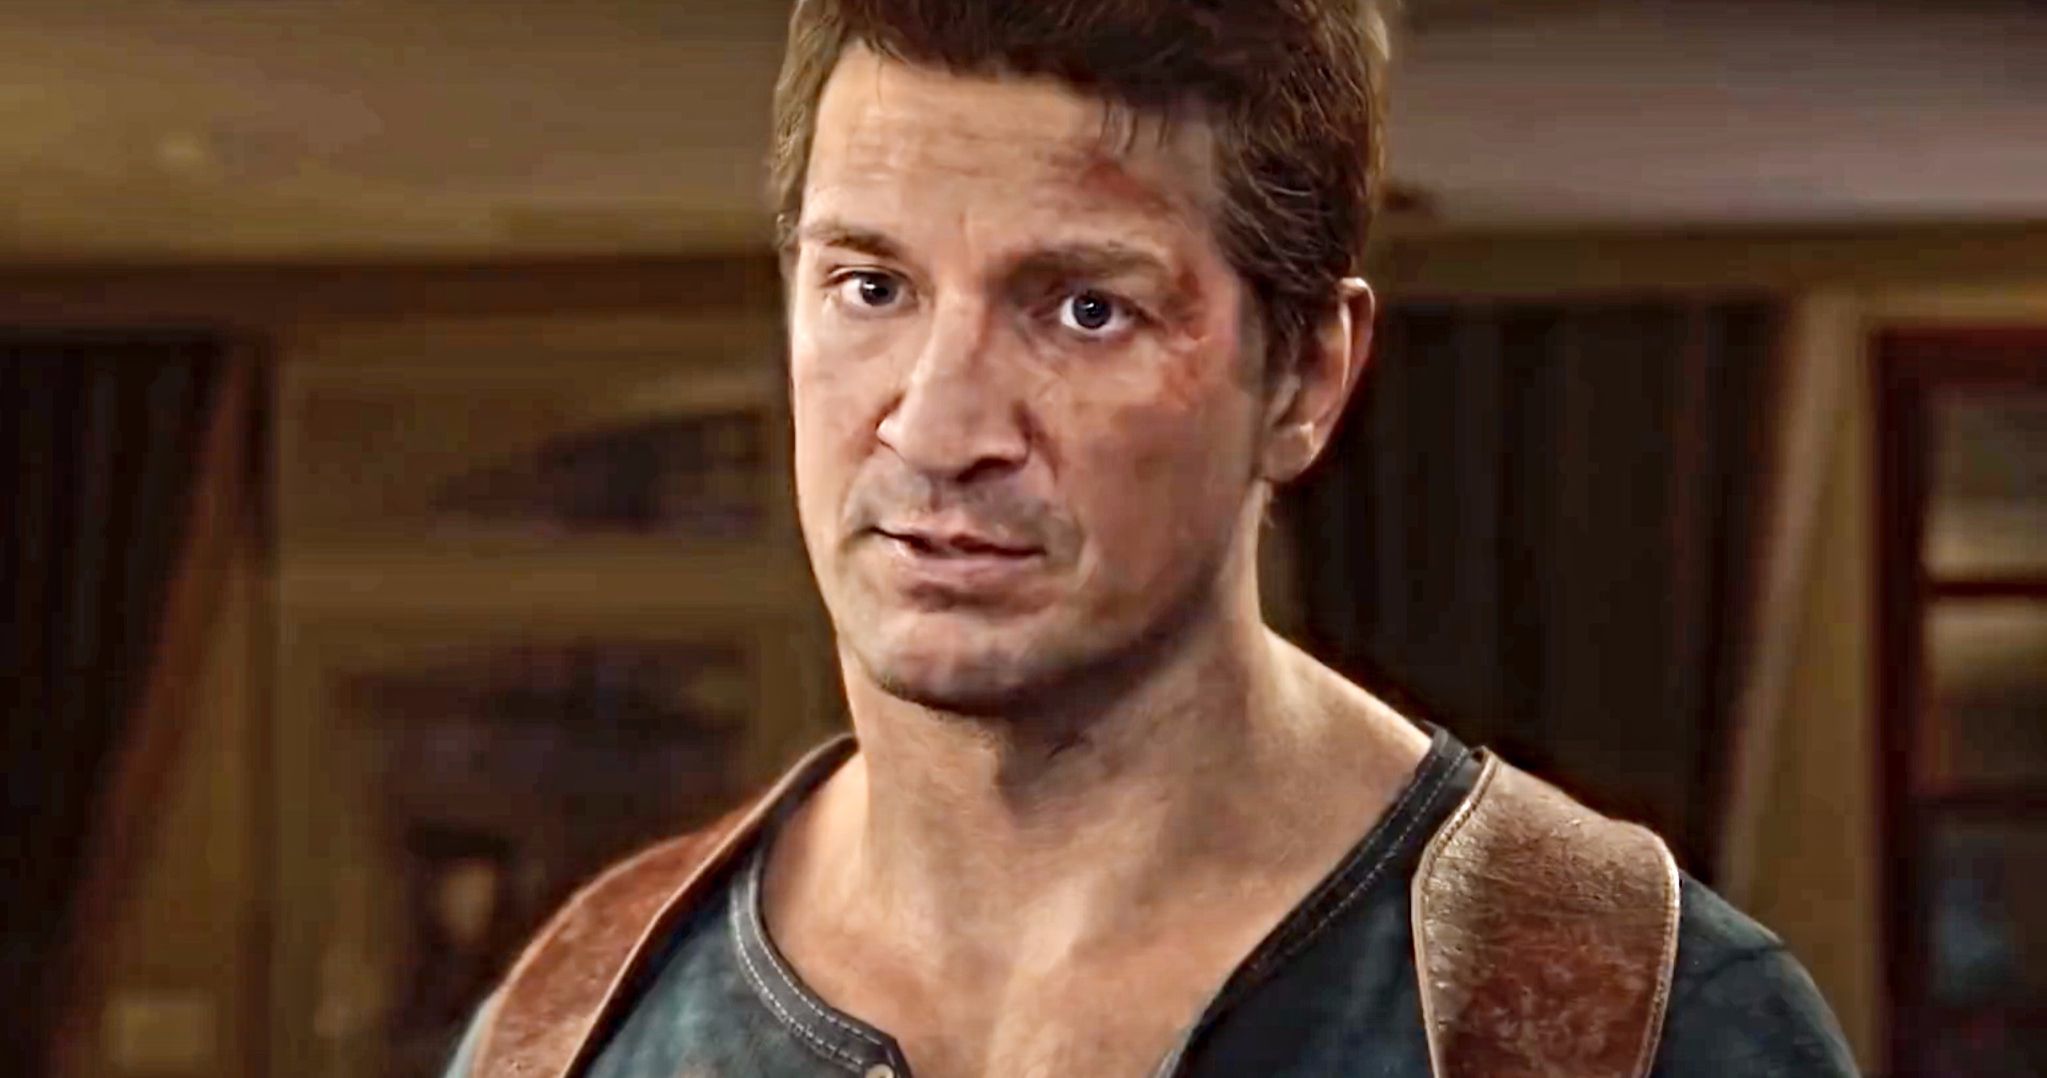 Watch Nathan Fillion as Nathan Drake in Uncharted 